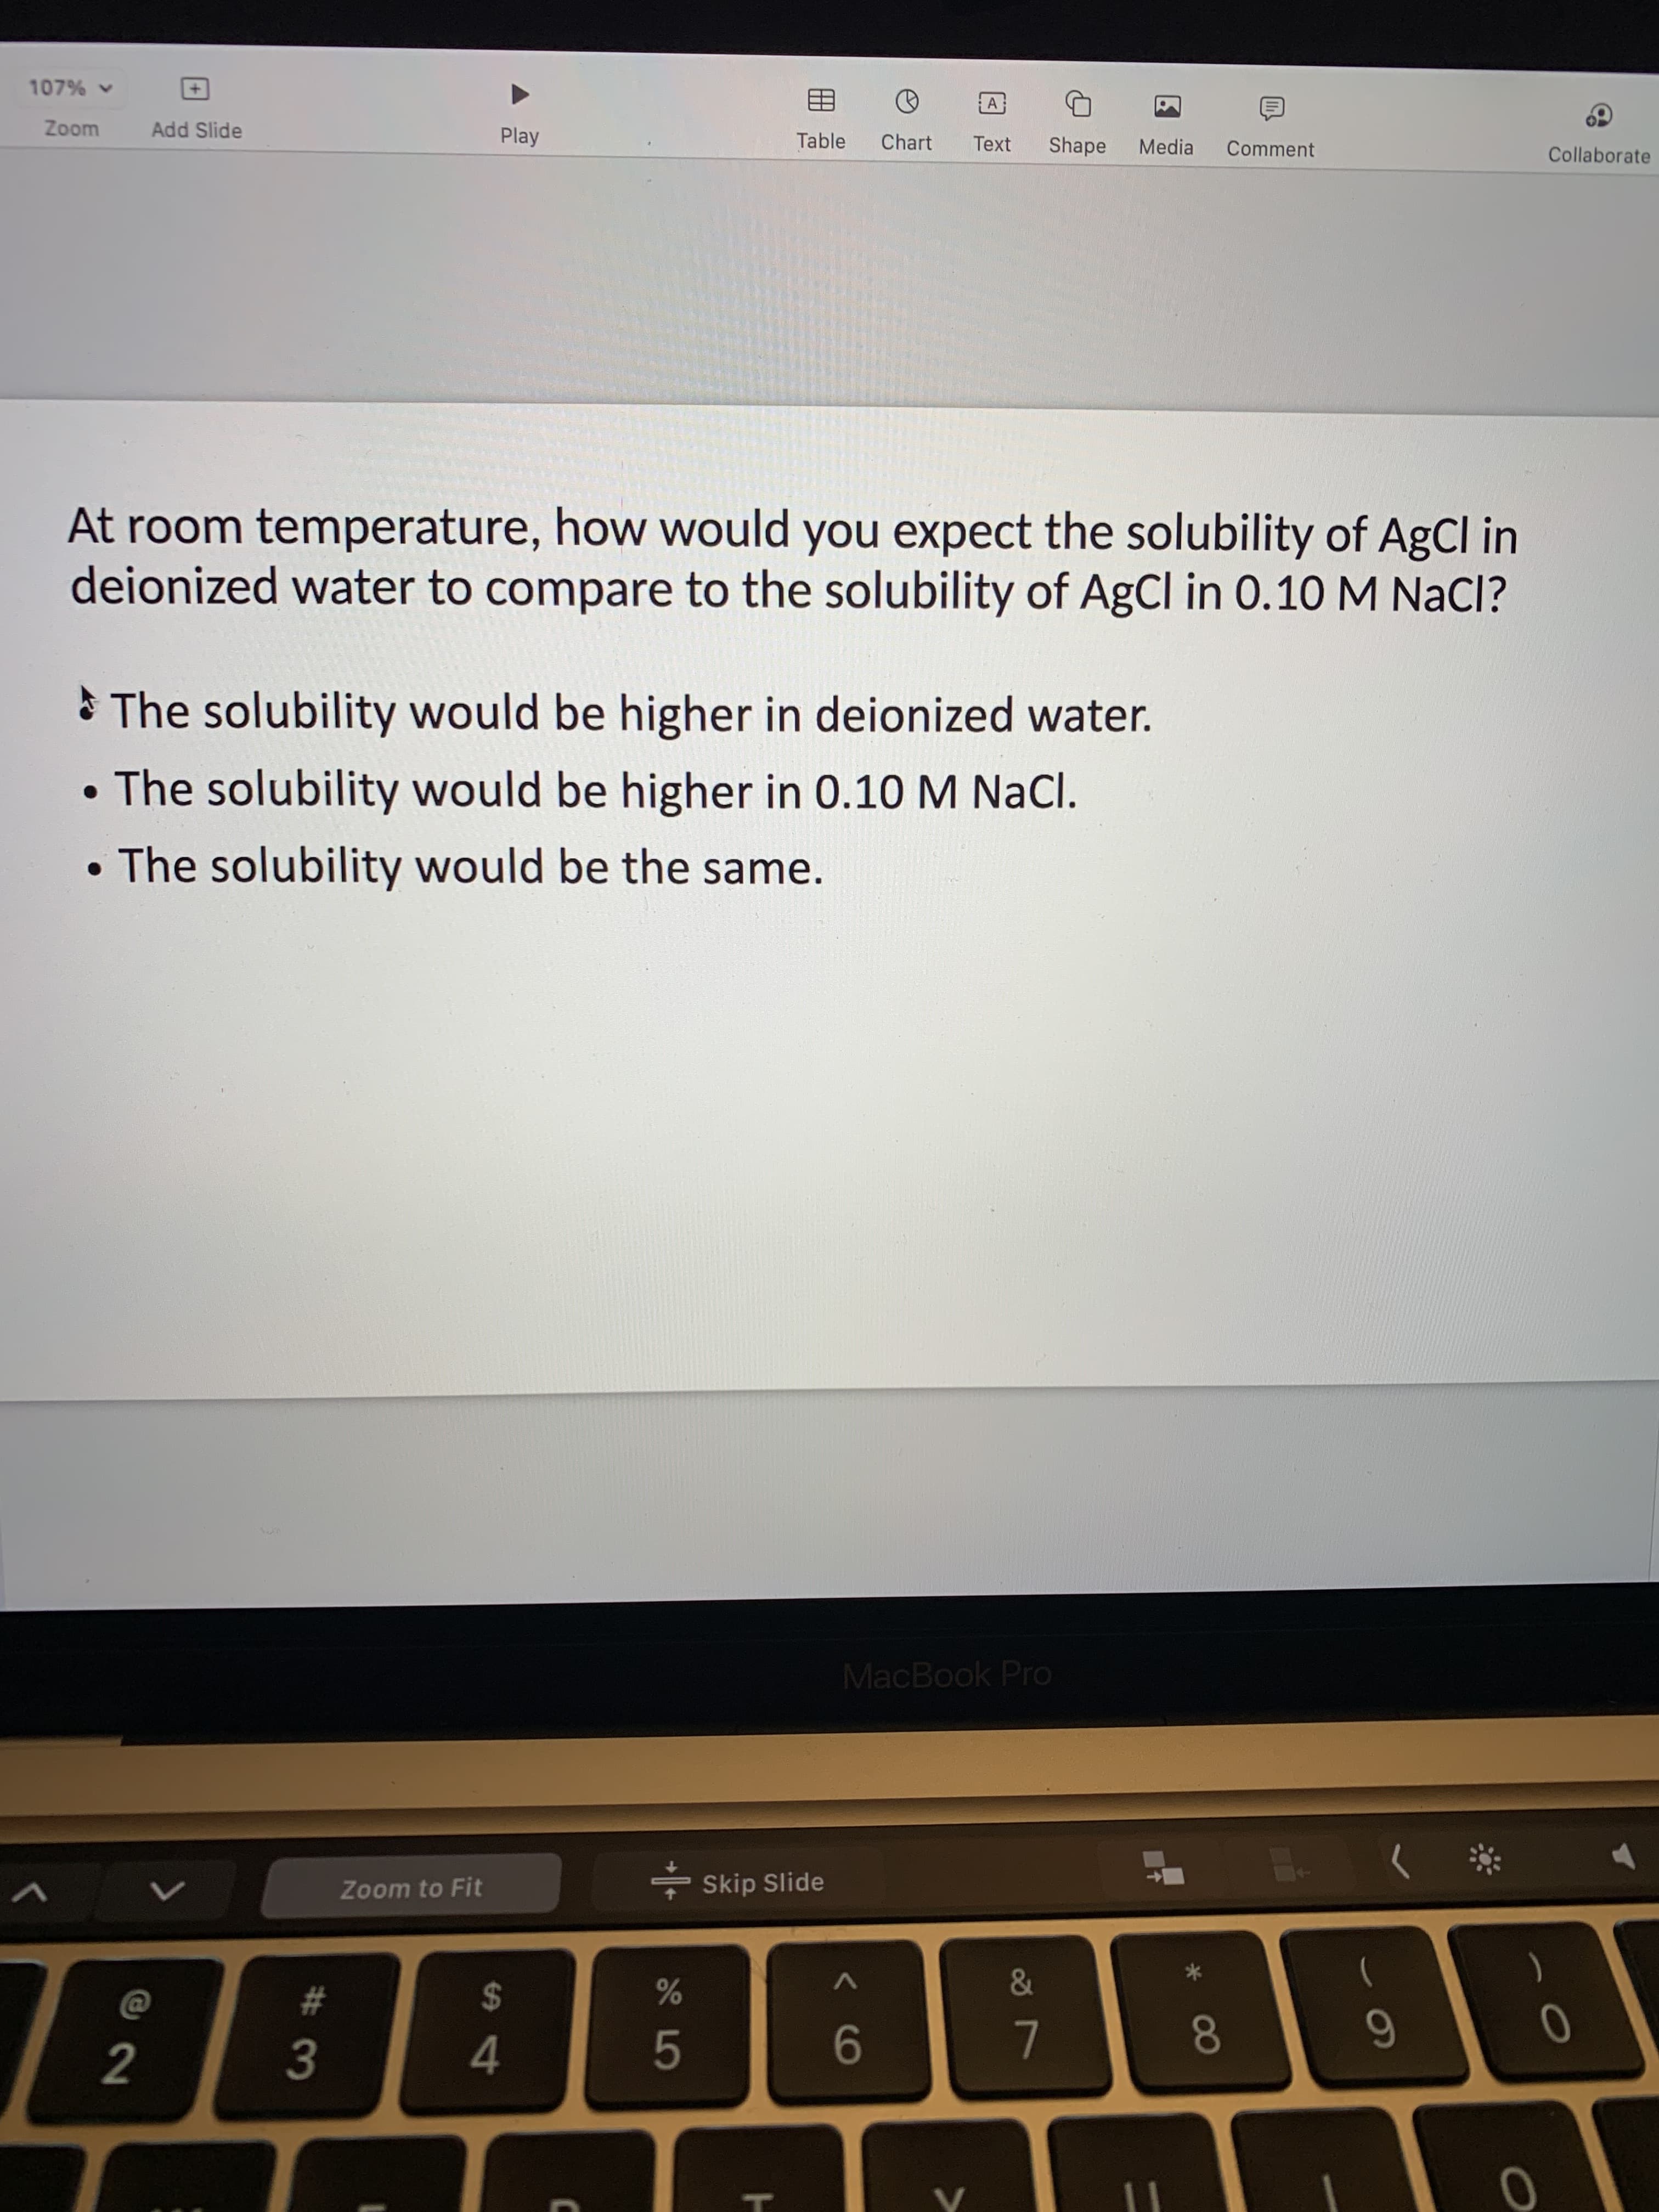 00
T
5
#3
2.
107%
Zoom
Add Slide
Play
Table
Chart
Text
Shape
Media
Comment
Collaborate
At room temperature, how would you expect the solubility of AgCl in
deionized water to compare to the solubility of AgCl in 0.10 M NaCl?
* The solubility would be higher in deionized water.
•The solubility would be higher in 0.10 M NaCl.
• The solubility would be the same.
MacBook Pro
- Skip Slide
Zoom to Fit
&
$
0
4.
9-
